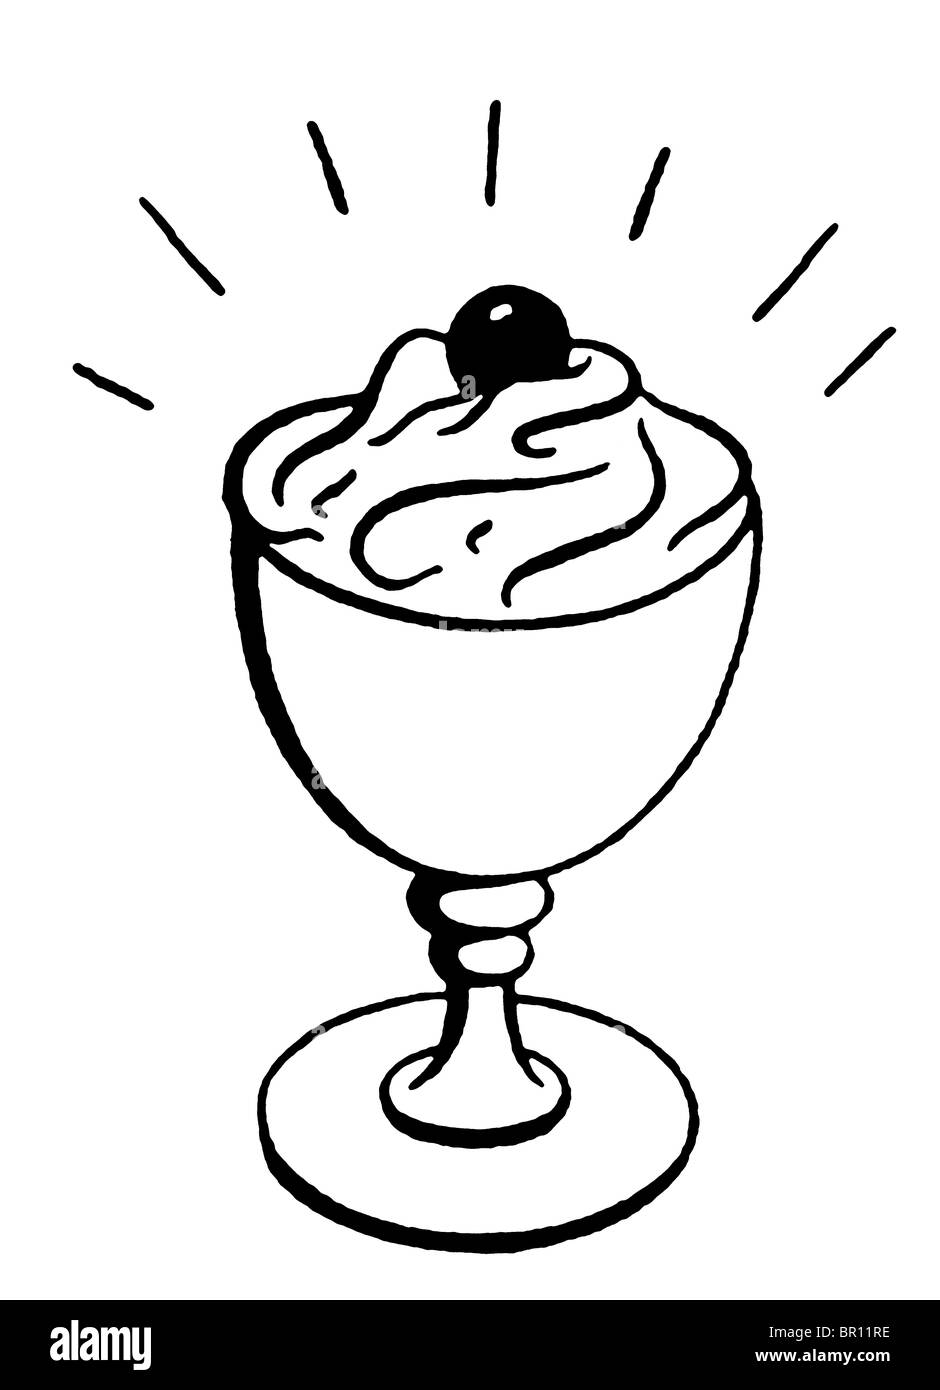 A black and white version of an illustration of an ice-cream Sunday Stock Photo